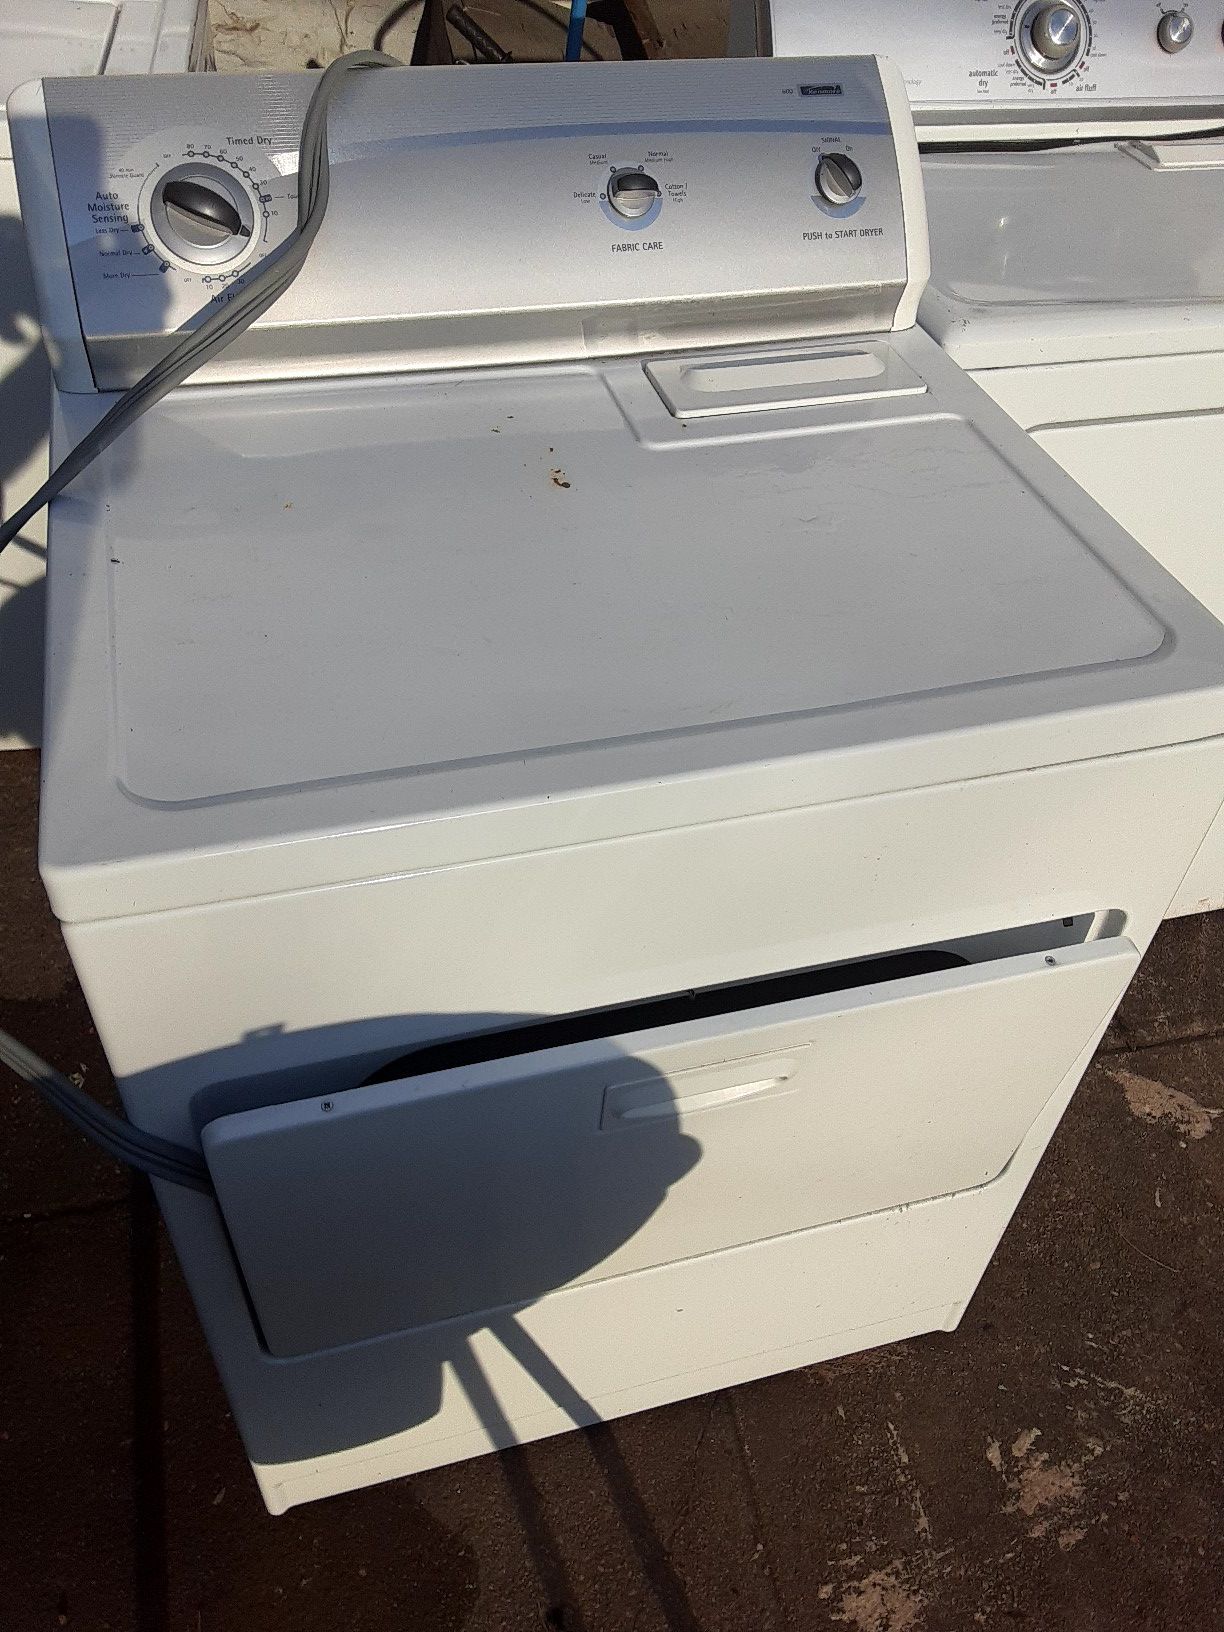 Maytag washer and dryer sold as a set.